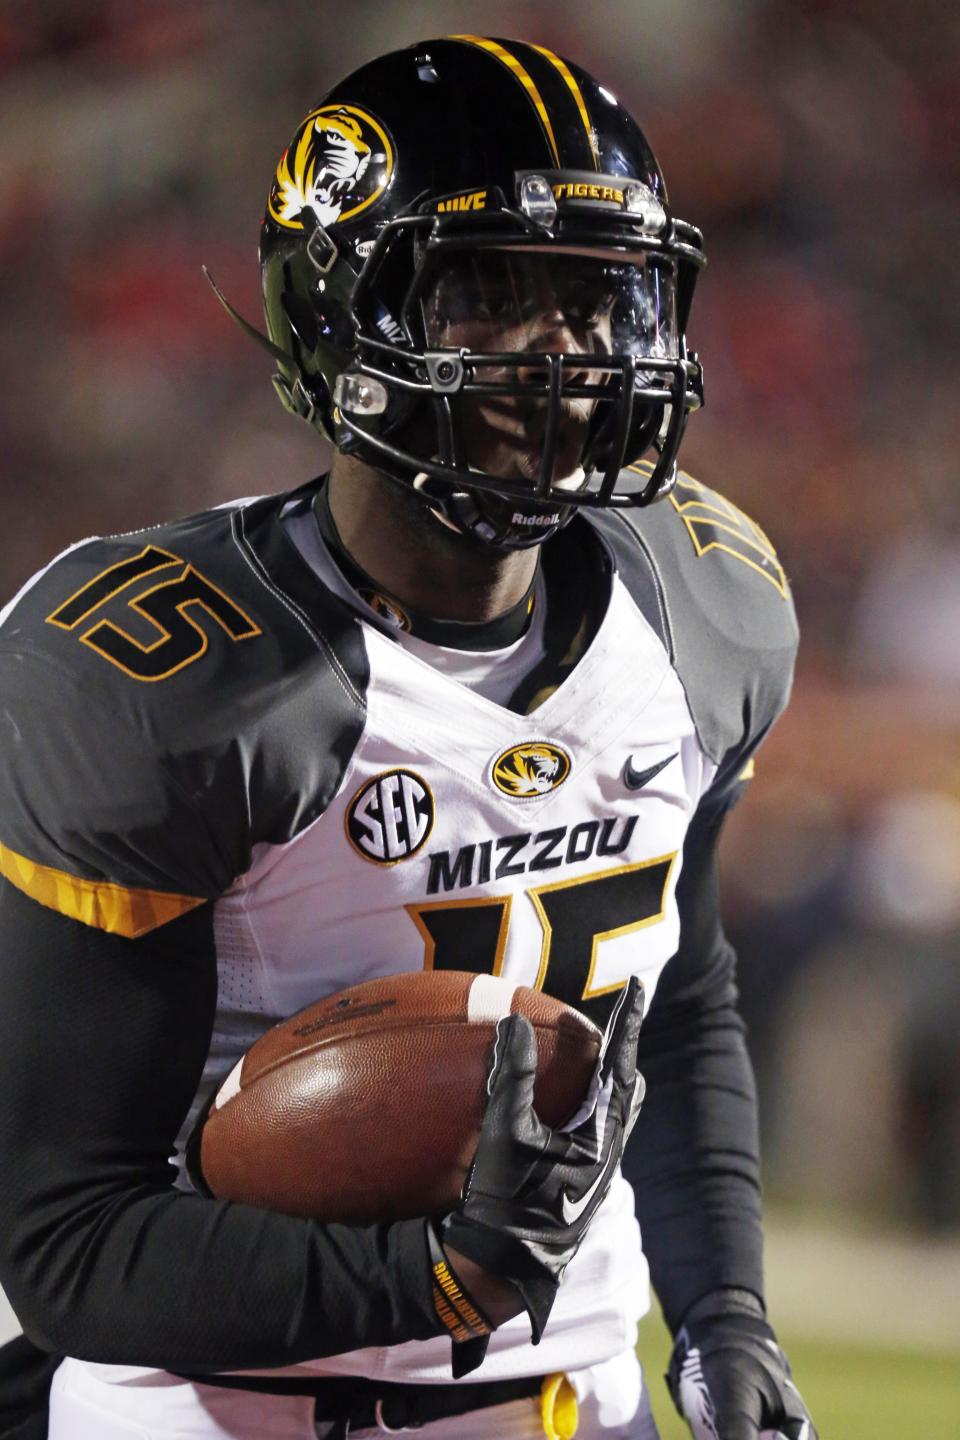 FILE - In this Nov. 23, 2013, file photo, Missouri wide receiver Dorial Green-Beckham runs with a caught pass during pre-game drills before an NCAA college football game against Mississippi in Oxford, Miss. Dorial Green-Beckham was suspended indefinitely Monday, April 7, 2014, for an unspecified violation of team rules, three months after he and two friends were arrested on suspicion of felony drug distribution when police found a pound of marijuana in their car. Coach Gary Pinkel announced the suspension without mentioning the January incident in which the standout receiver was arrested in his Missouri hometown of Springfield. (AP Photo/Rogelio V. Solis, File)